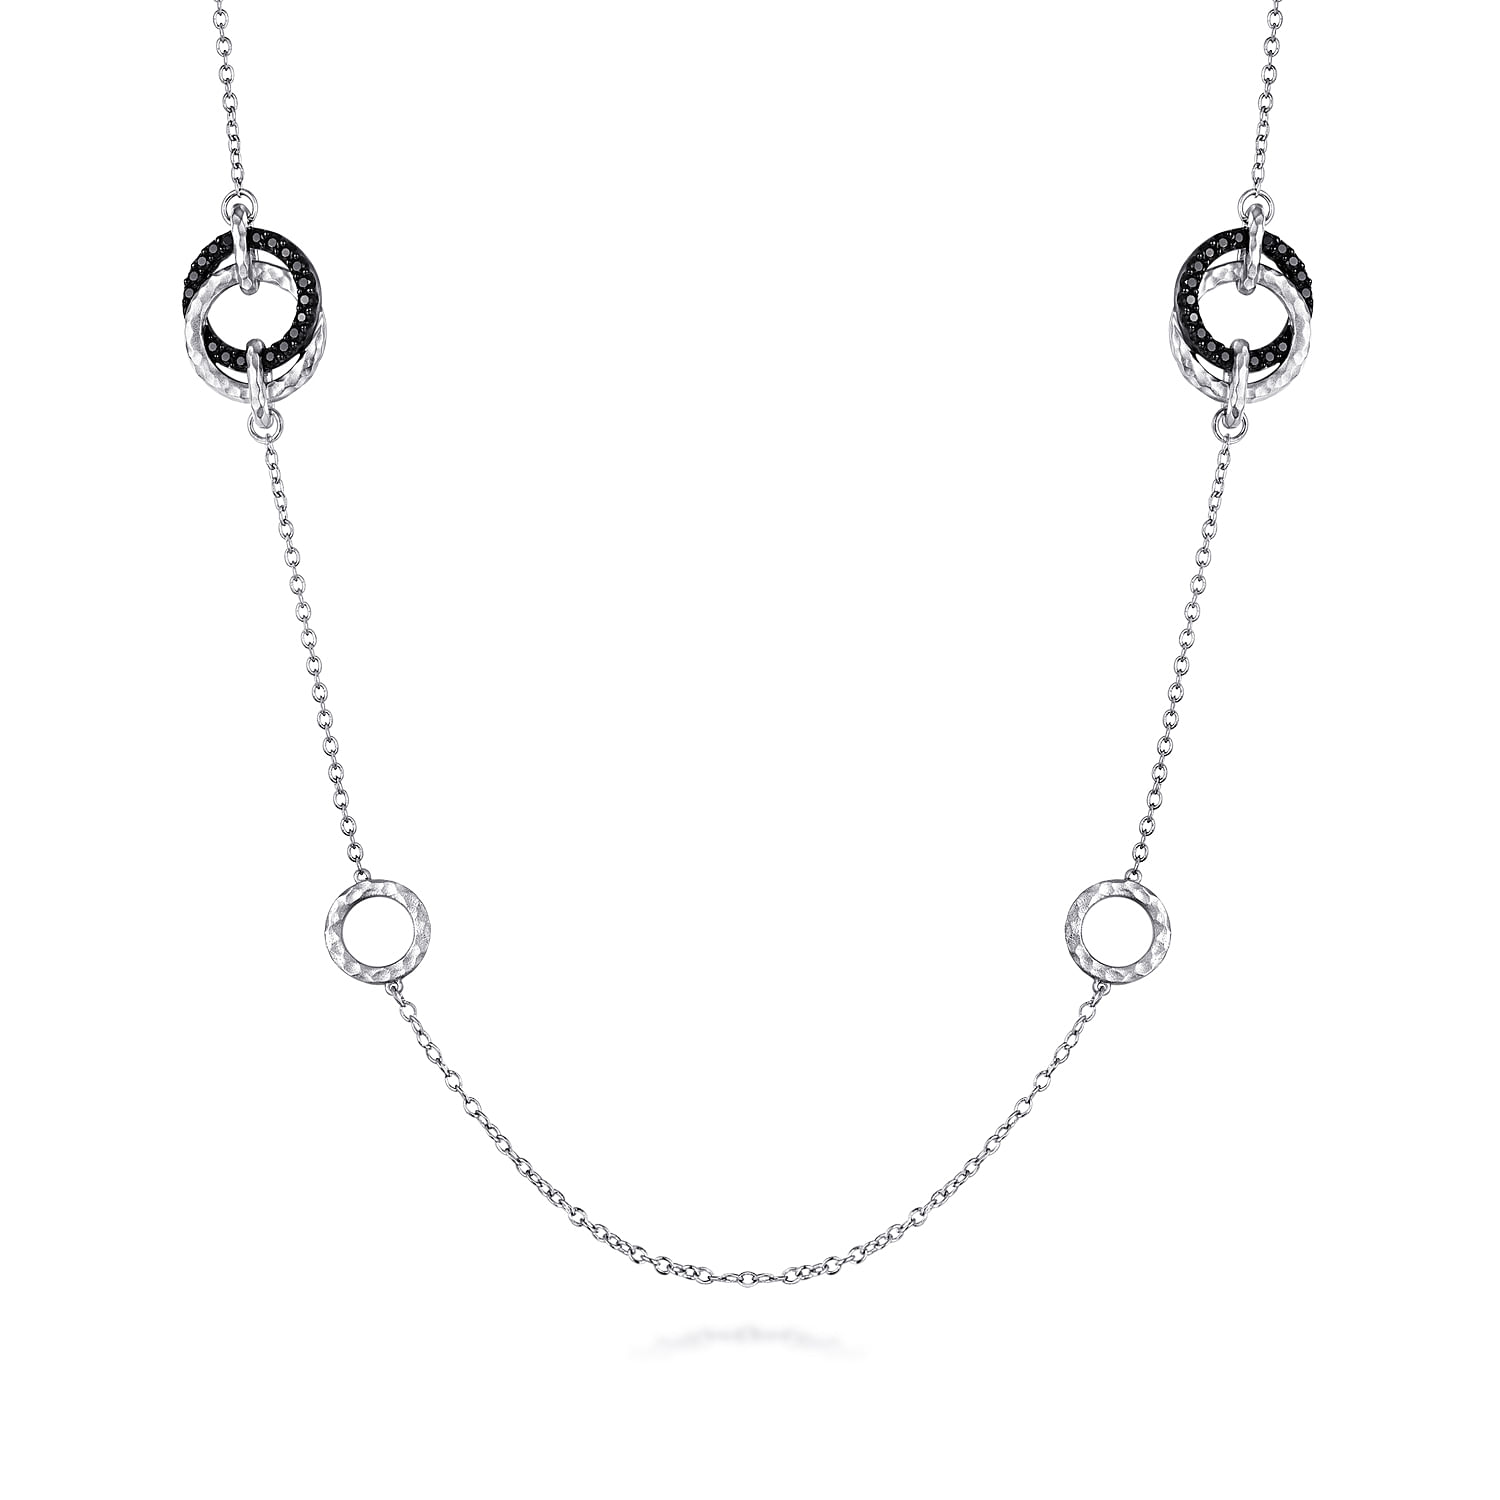 25 inch 925 Sterling Silver Necklace with Black Spinel and Hammered Circle Stations